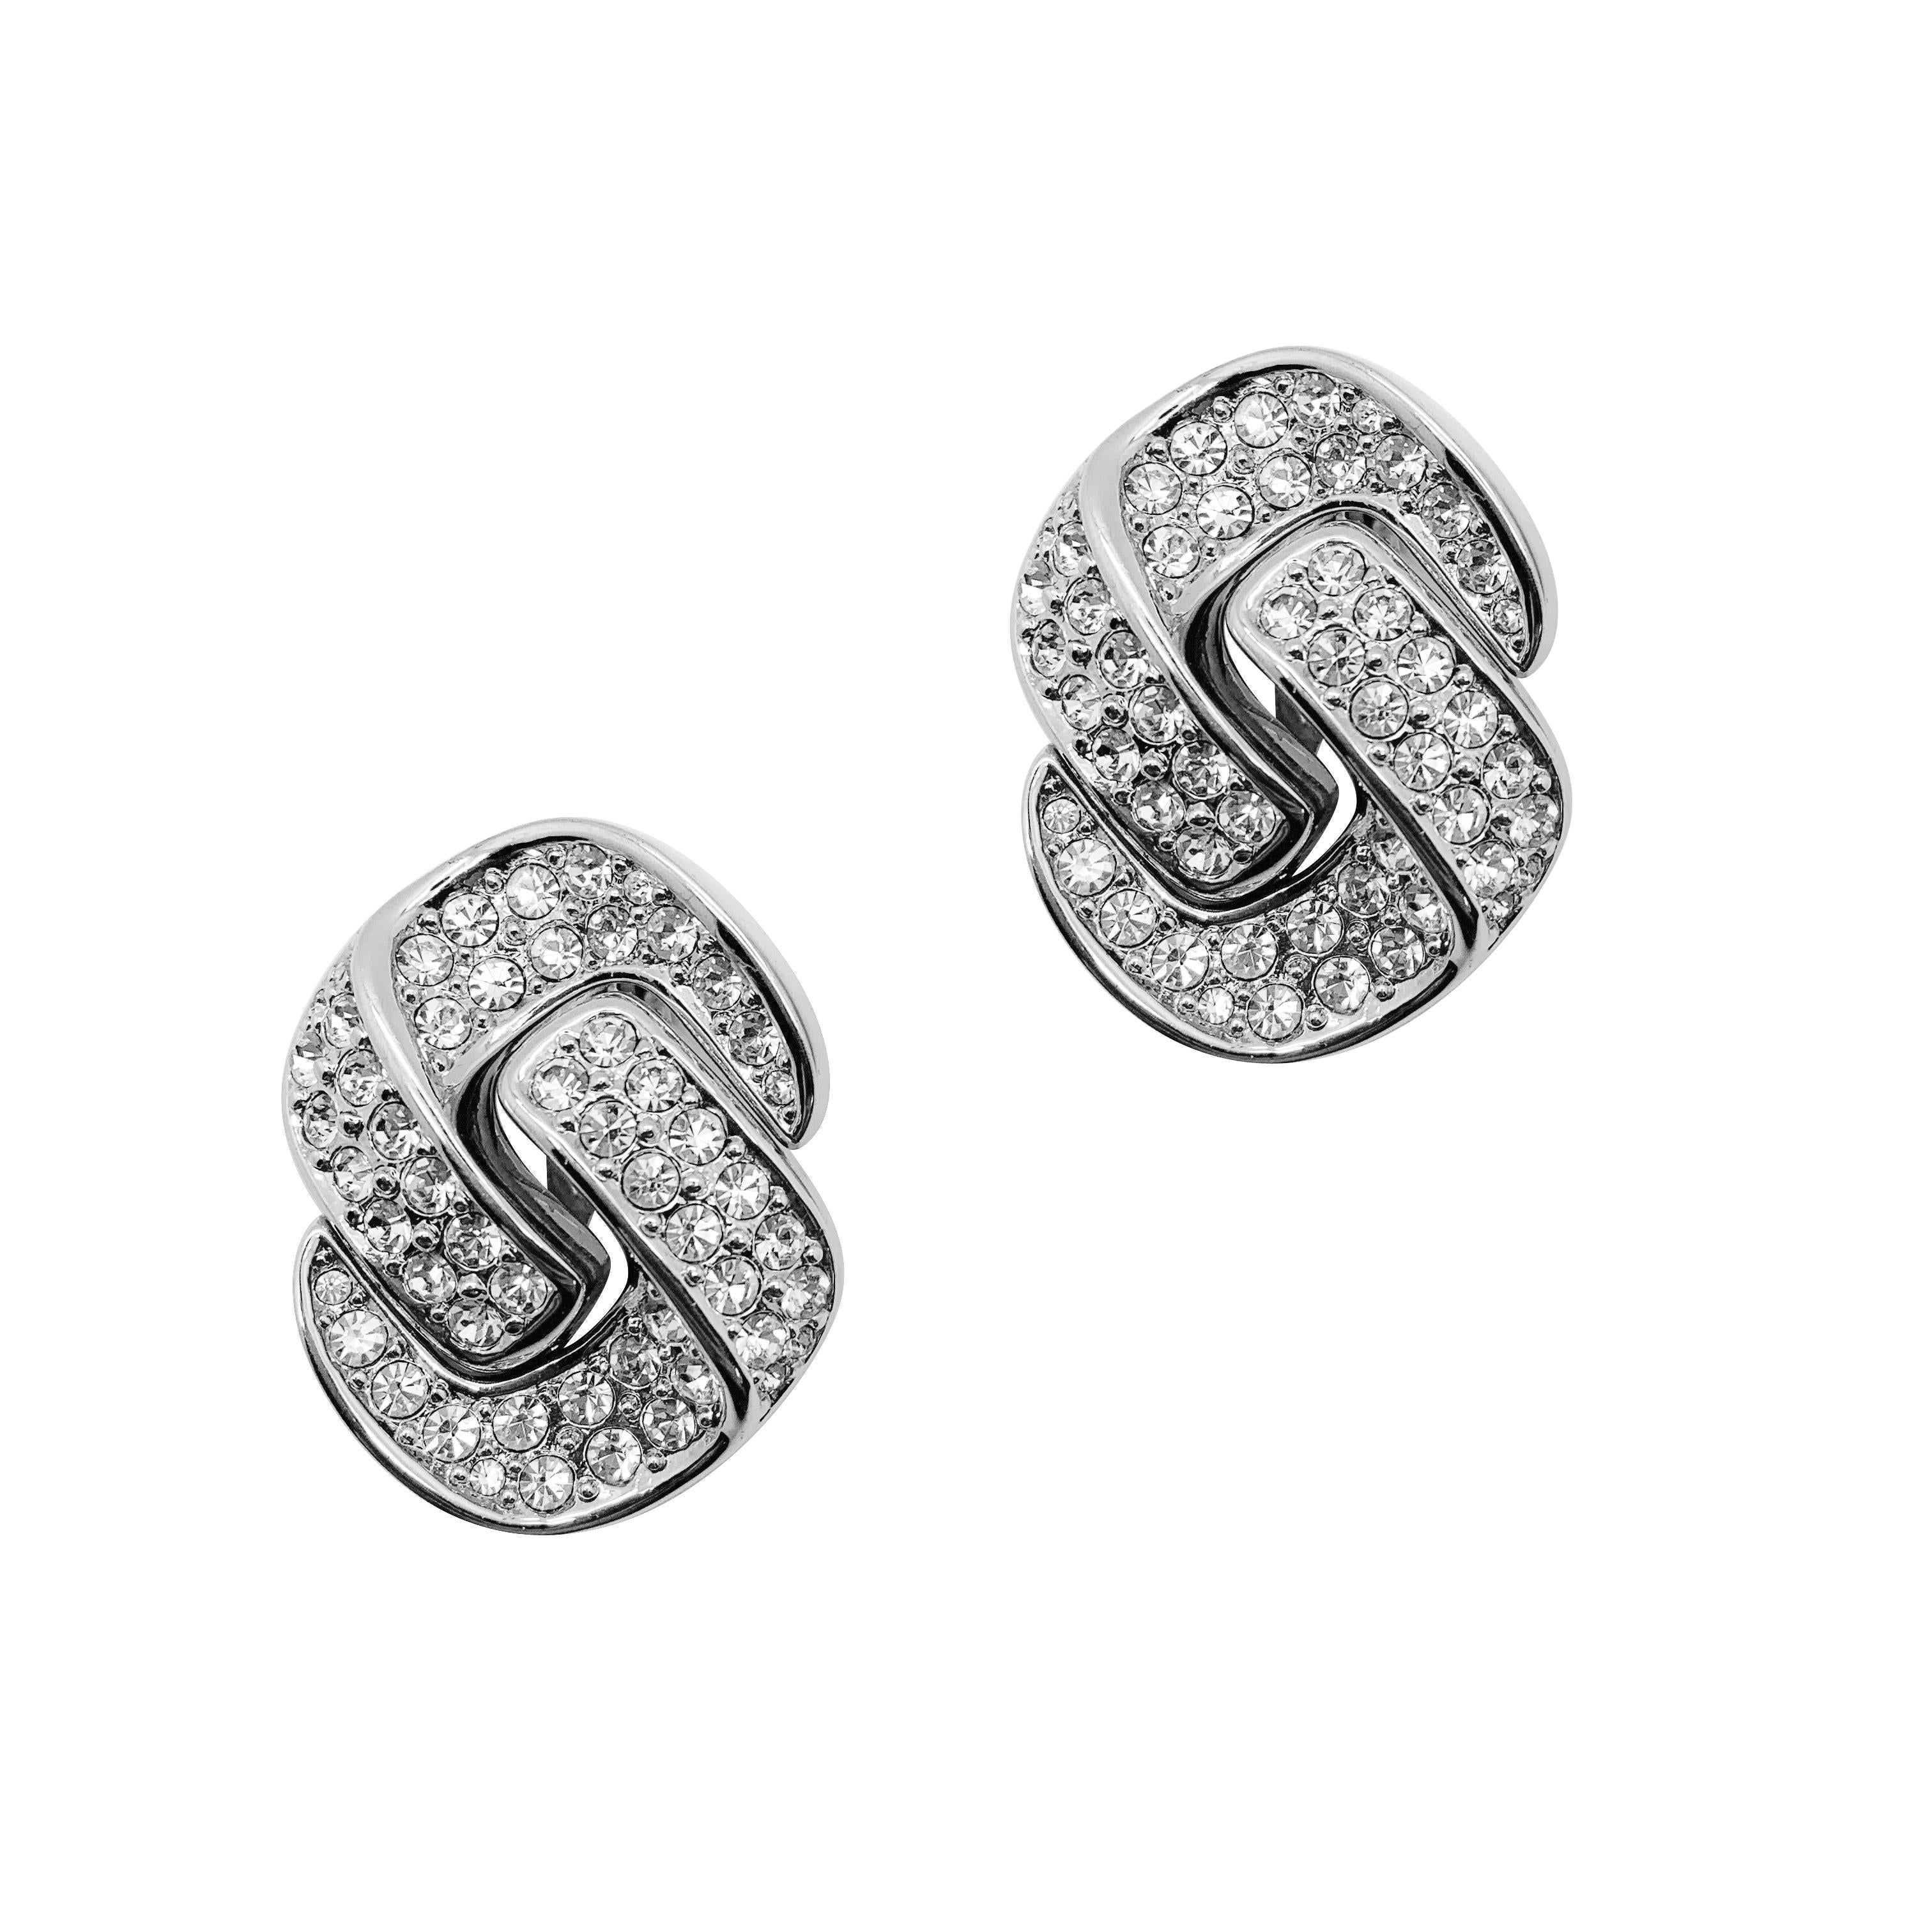 Our Vintage Dior Knot Earrings. A stunningly glamorous crystal encrusted knot style clip-on earring from the House of Dior. Pave set crystals adorn this contemporary style motif for maximum glampact. From the House of Christian Dior during the